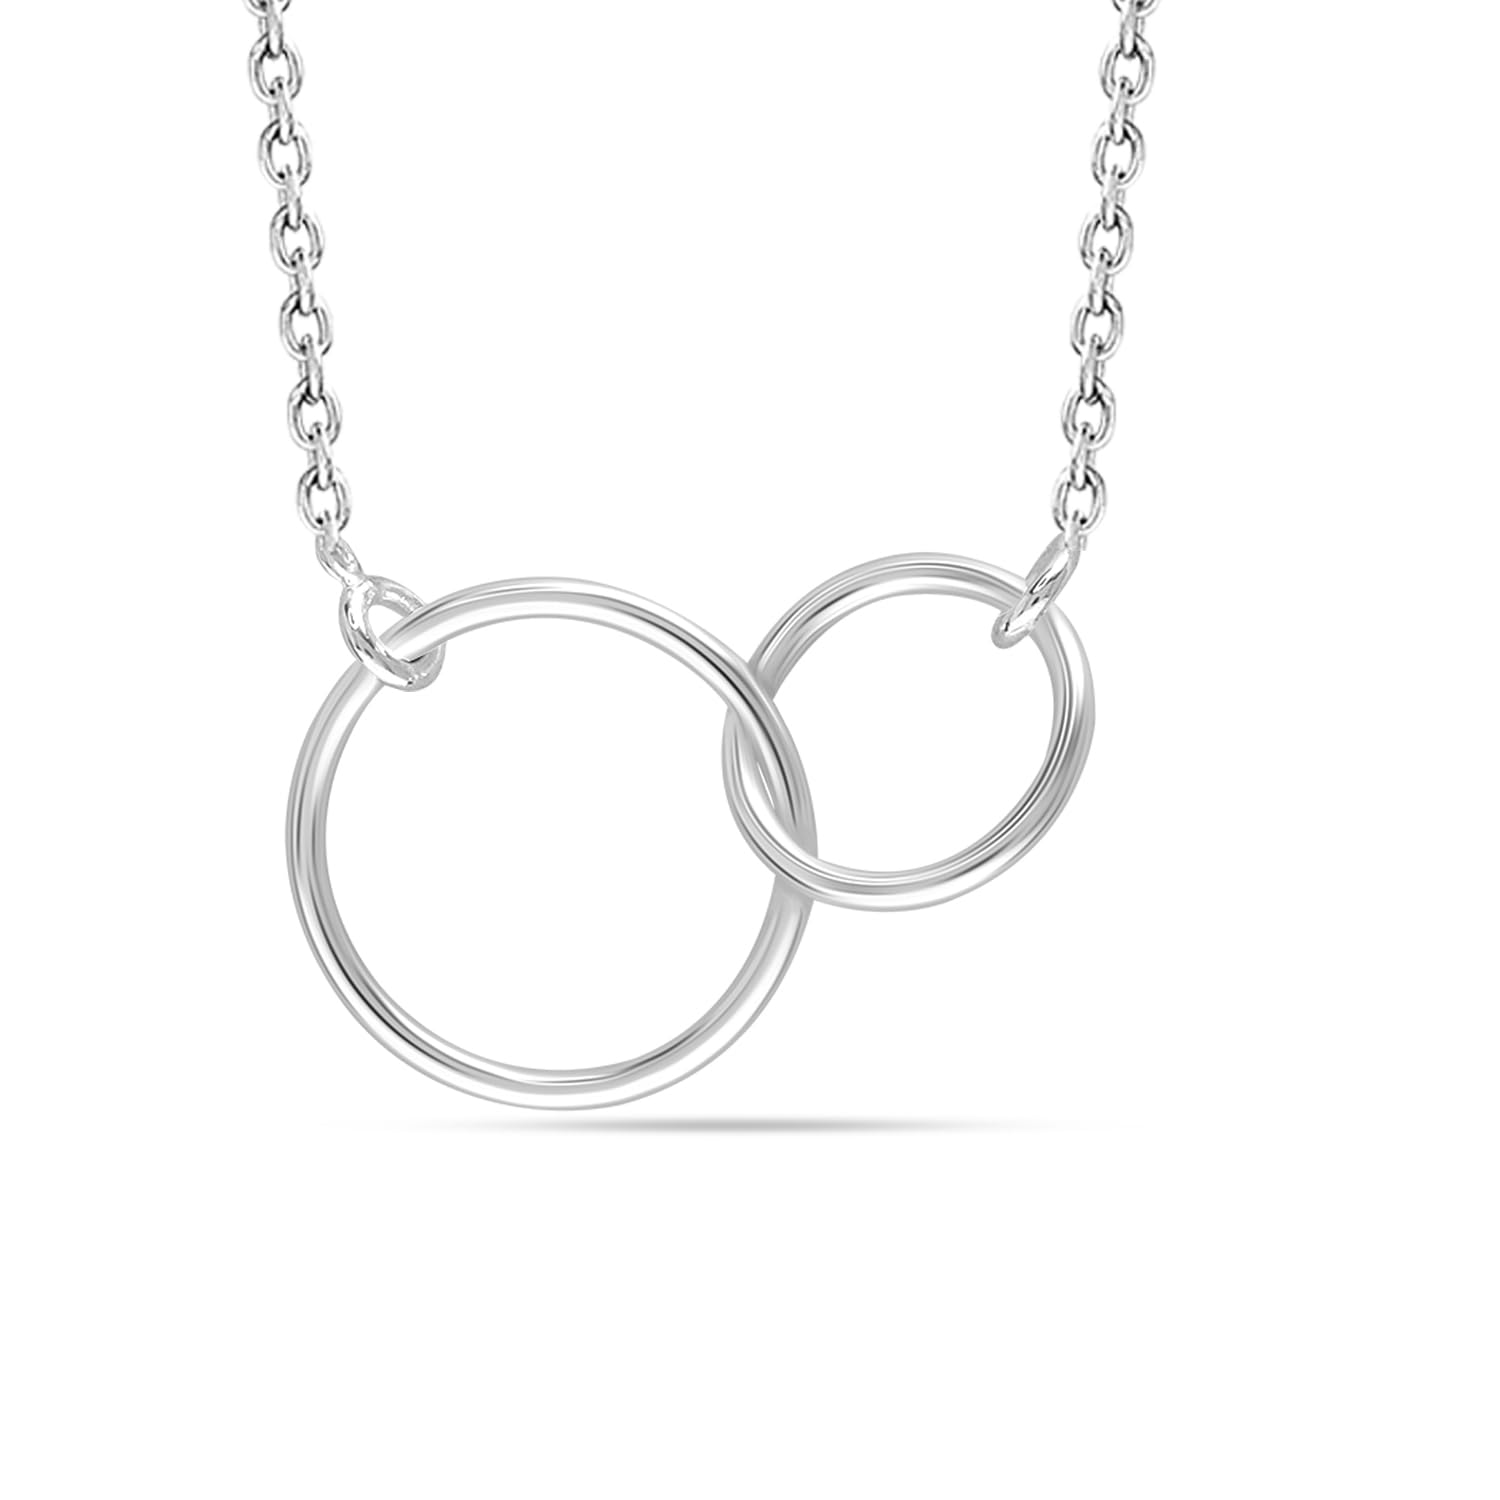 LeCalla 925 Sterling Silver Mother Daughter Necklace, Interlocking Infinity Double Circle Pendant Necklace, Mothers Day Necklace, Mother's Day Jewelry, First Mothers Day Gifts - Mothers Day Gift - image 1 of 5